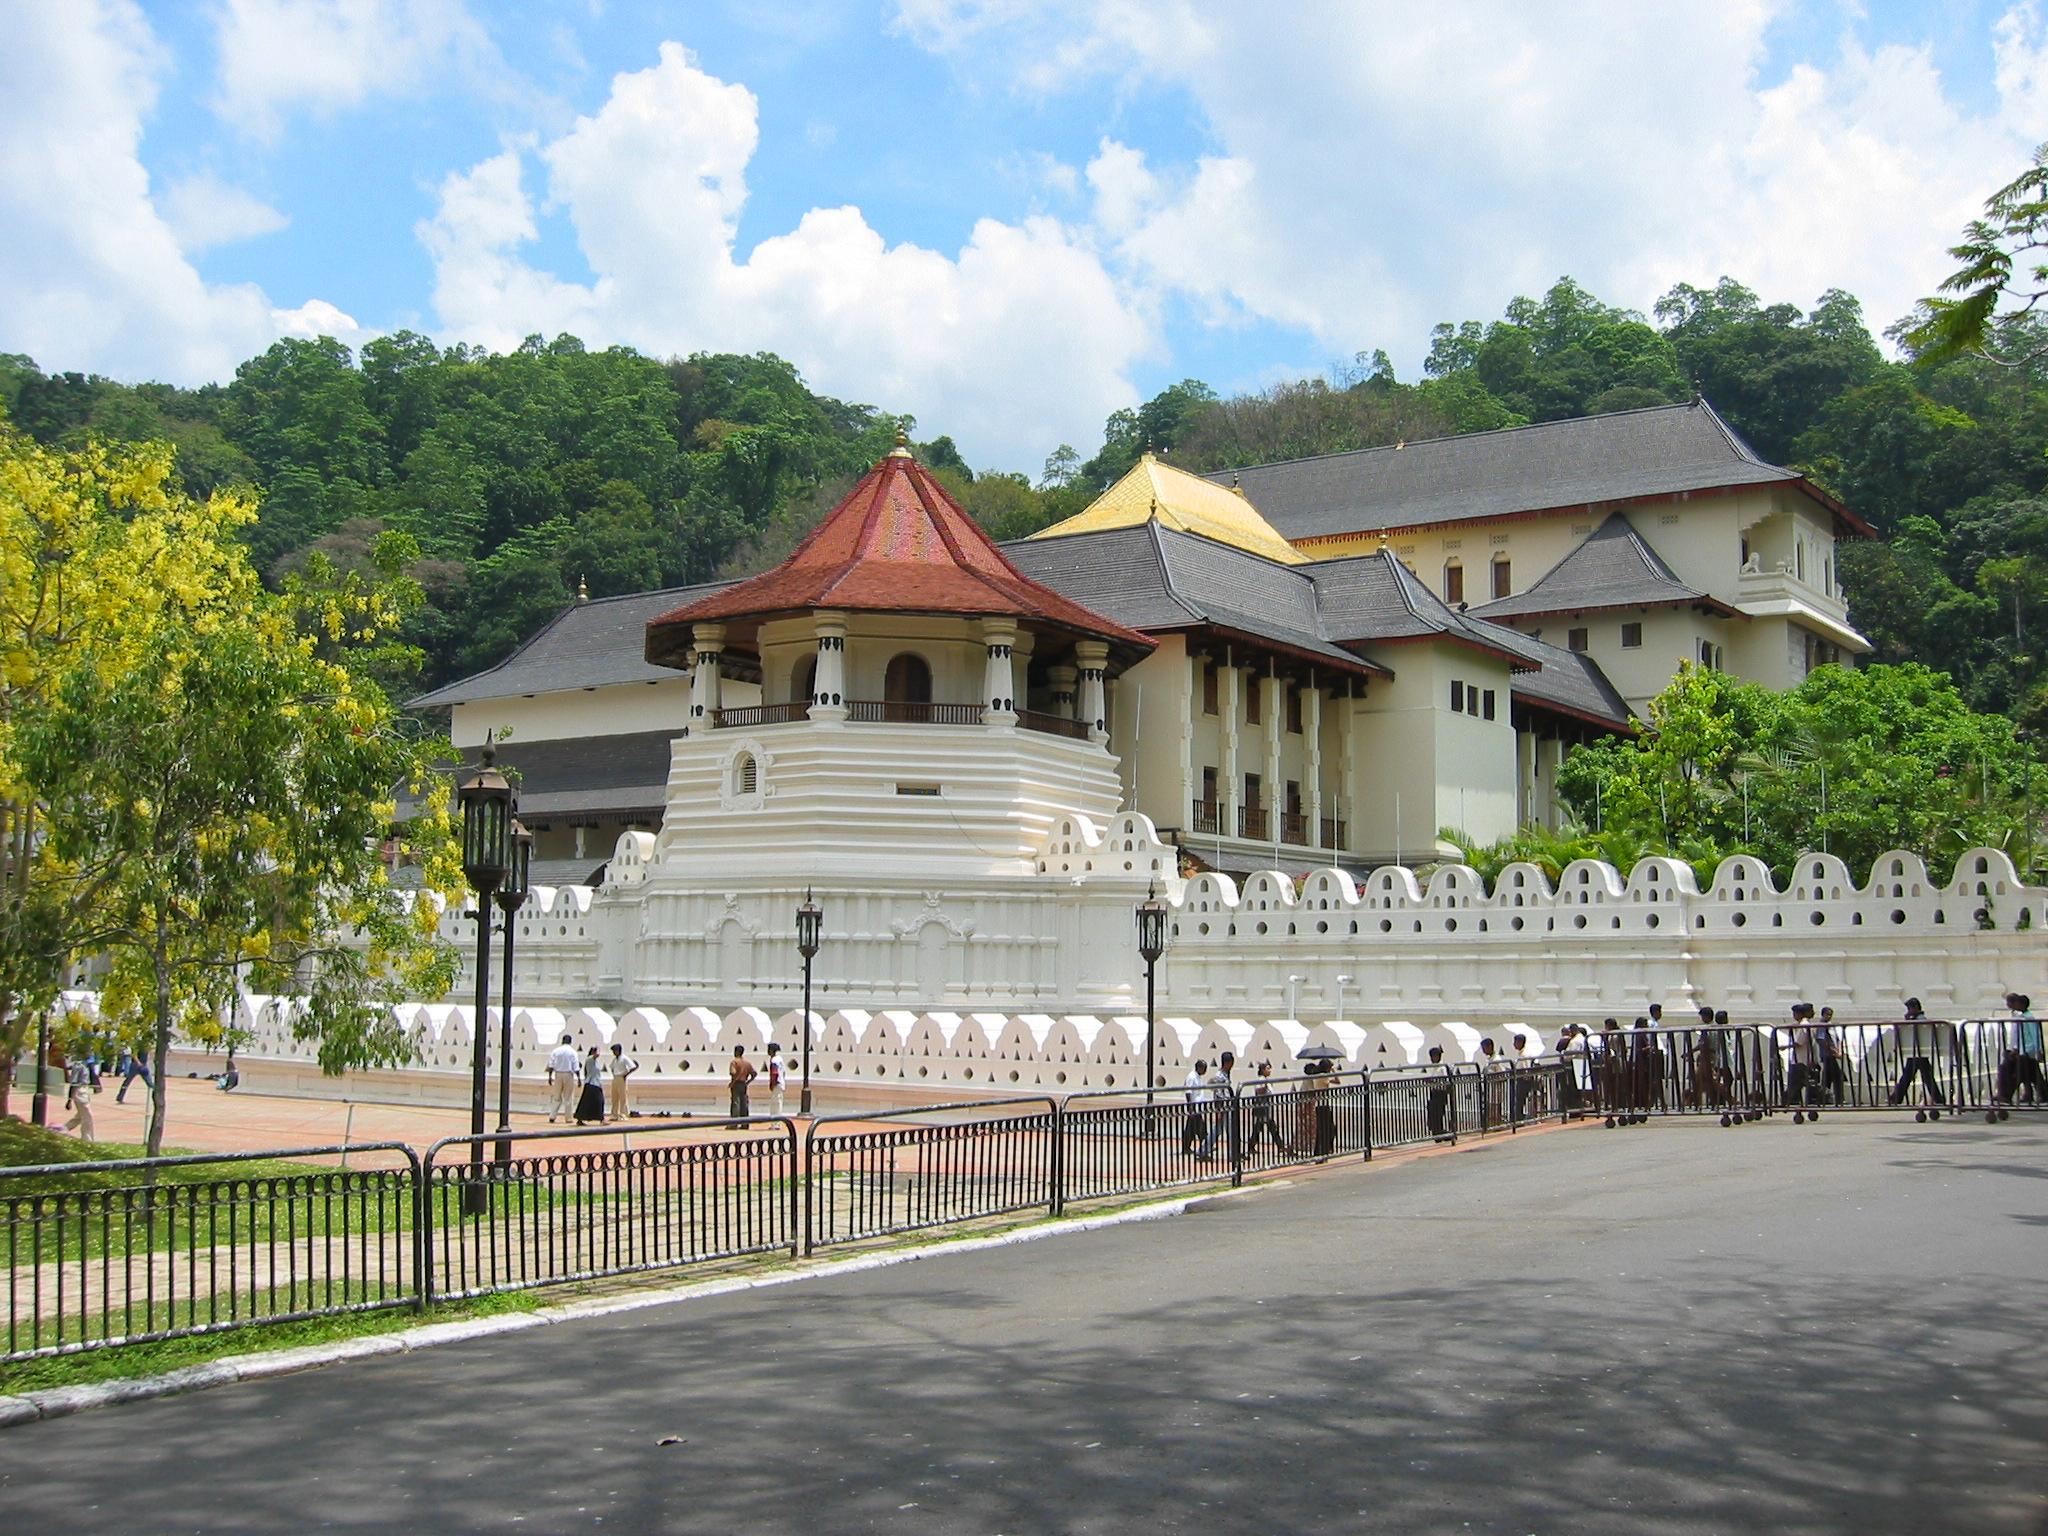 Kandy Day Tour with all included